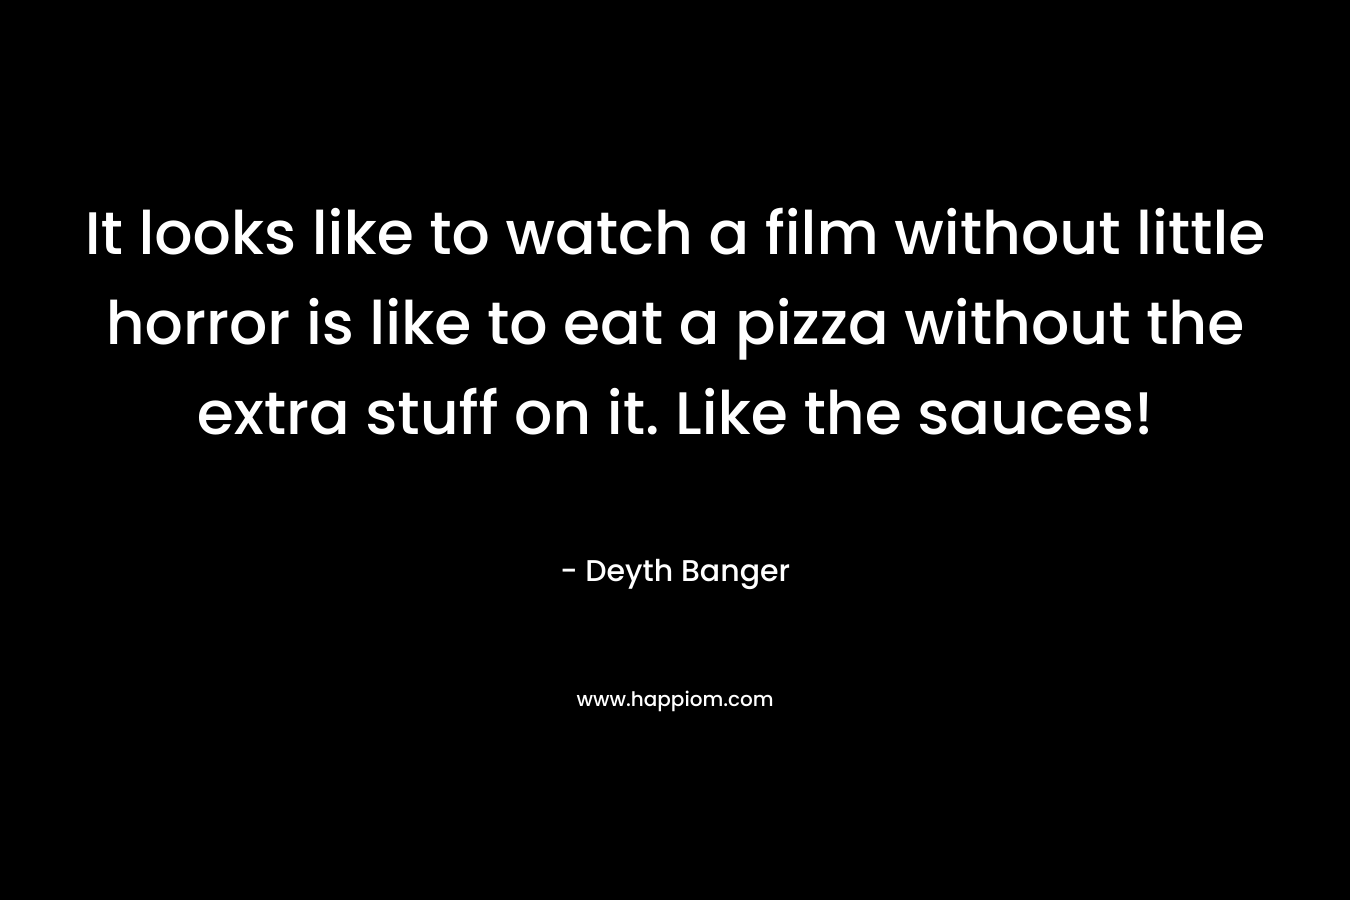 It looks like to watch a film without little horror is like to eat a pizza without the extra stuff on it. Like the sauces!